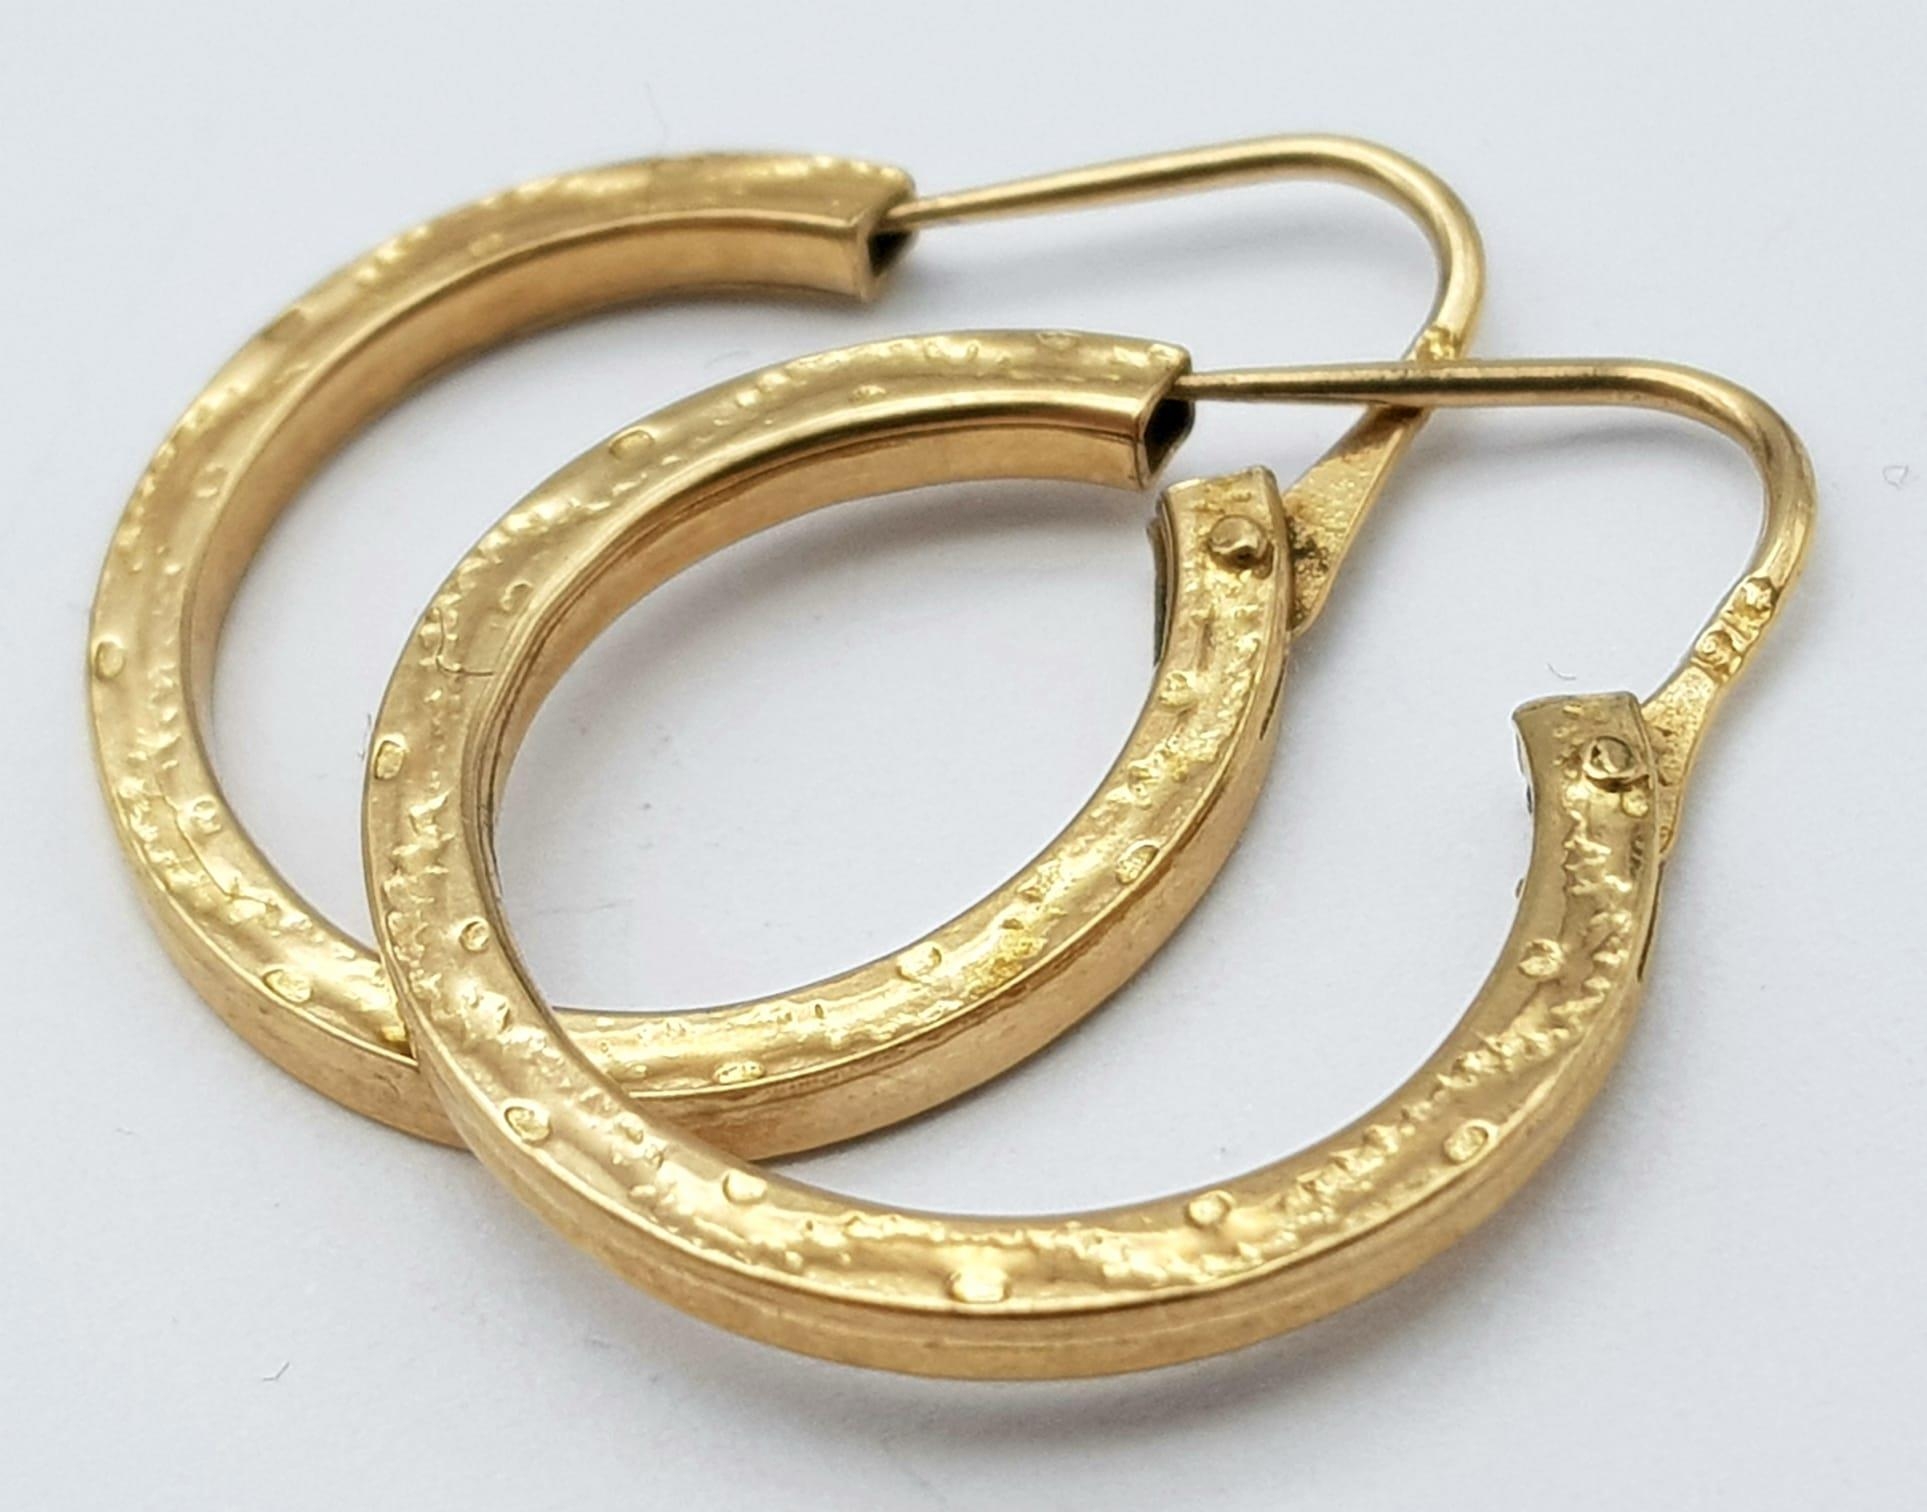 A Pair of 9K Yellow Gold Small Decorative Hoop Earrings. 1.92g weight. - Image 3 of 4